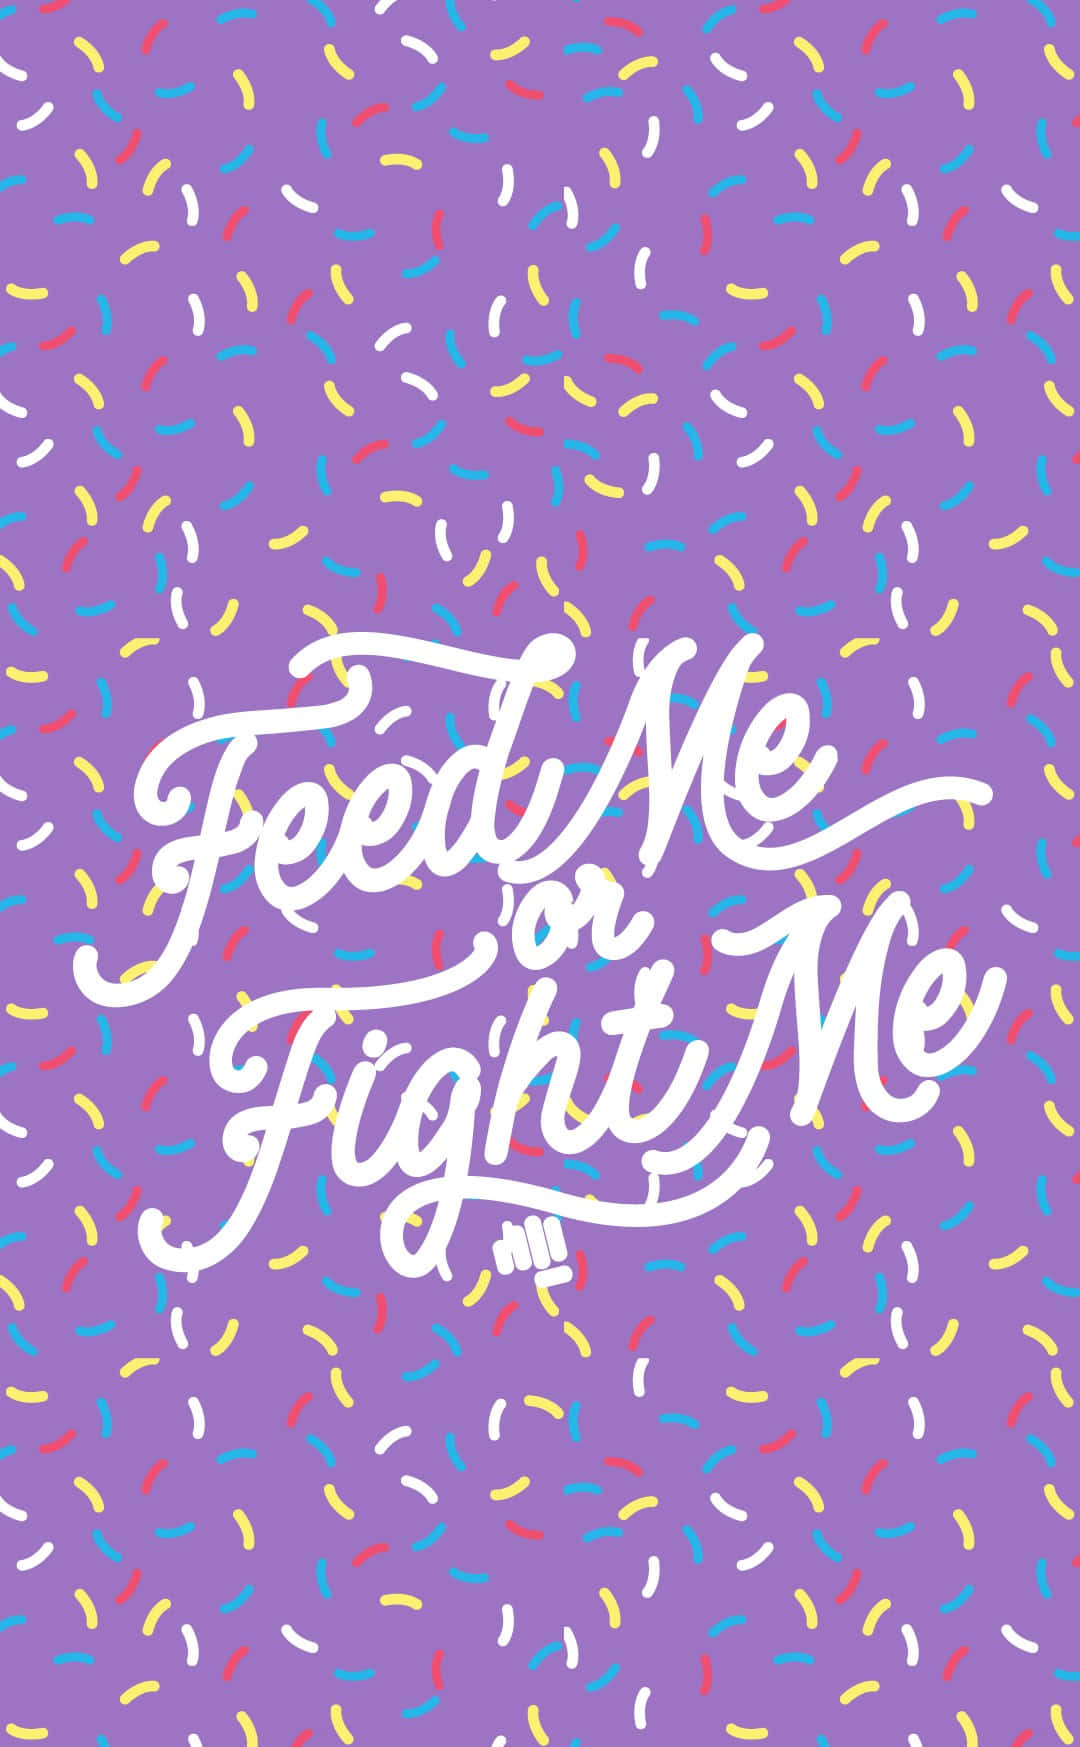 Feed Meor Fight Me Sprinkles Background Wallpaper